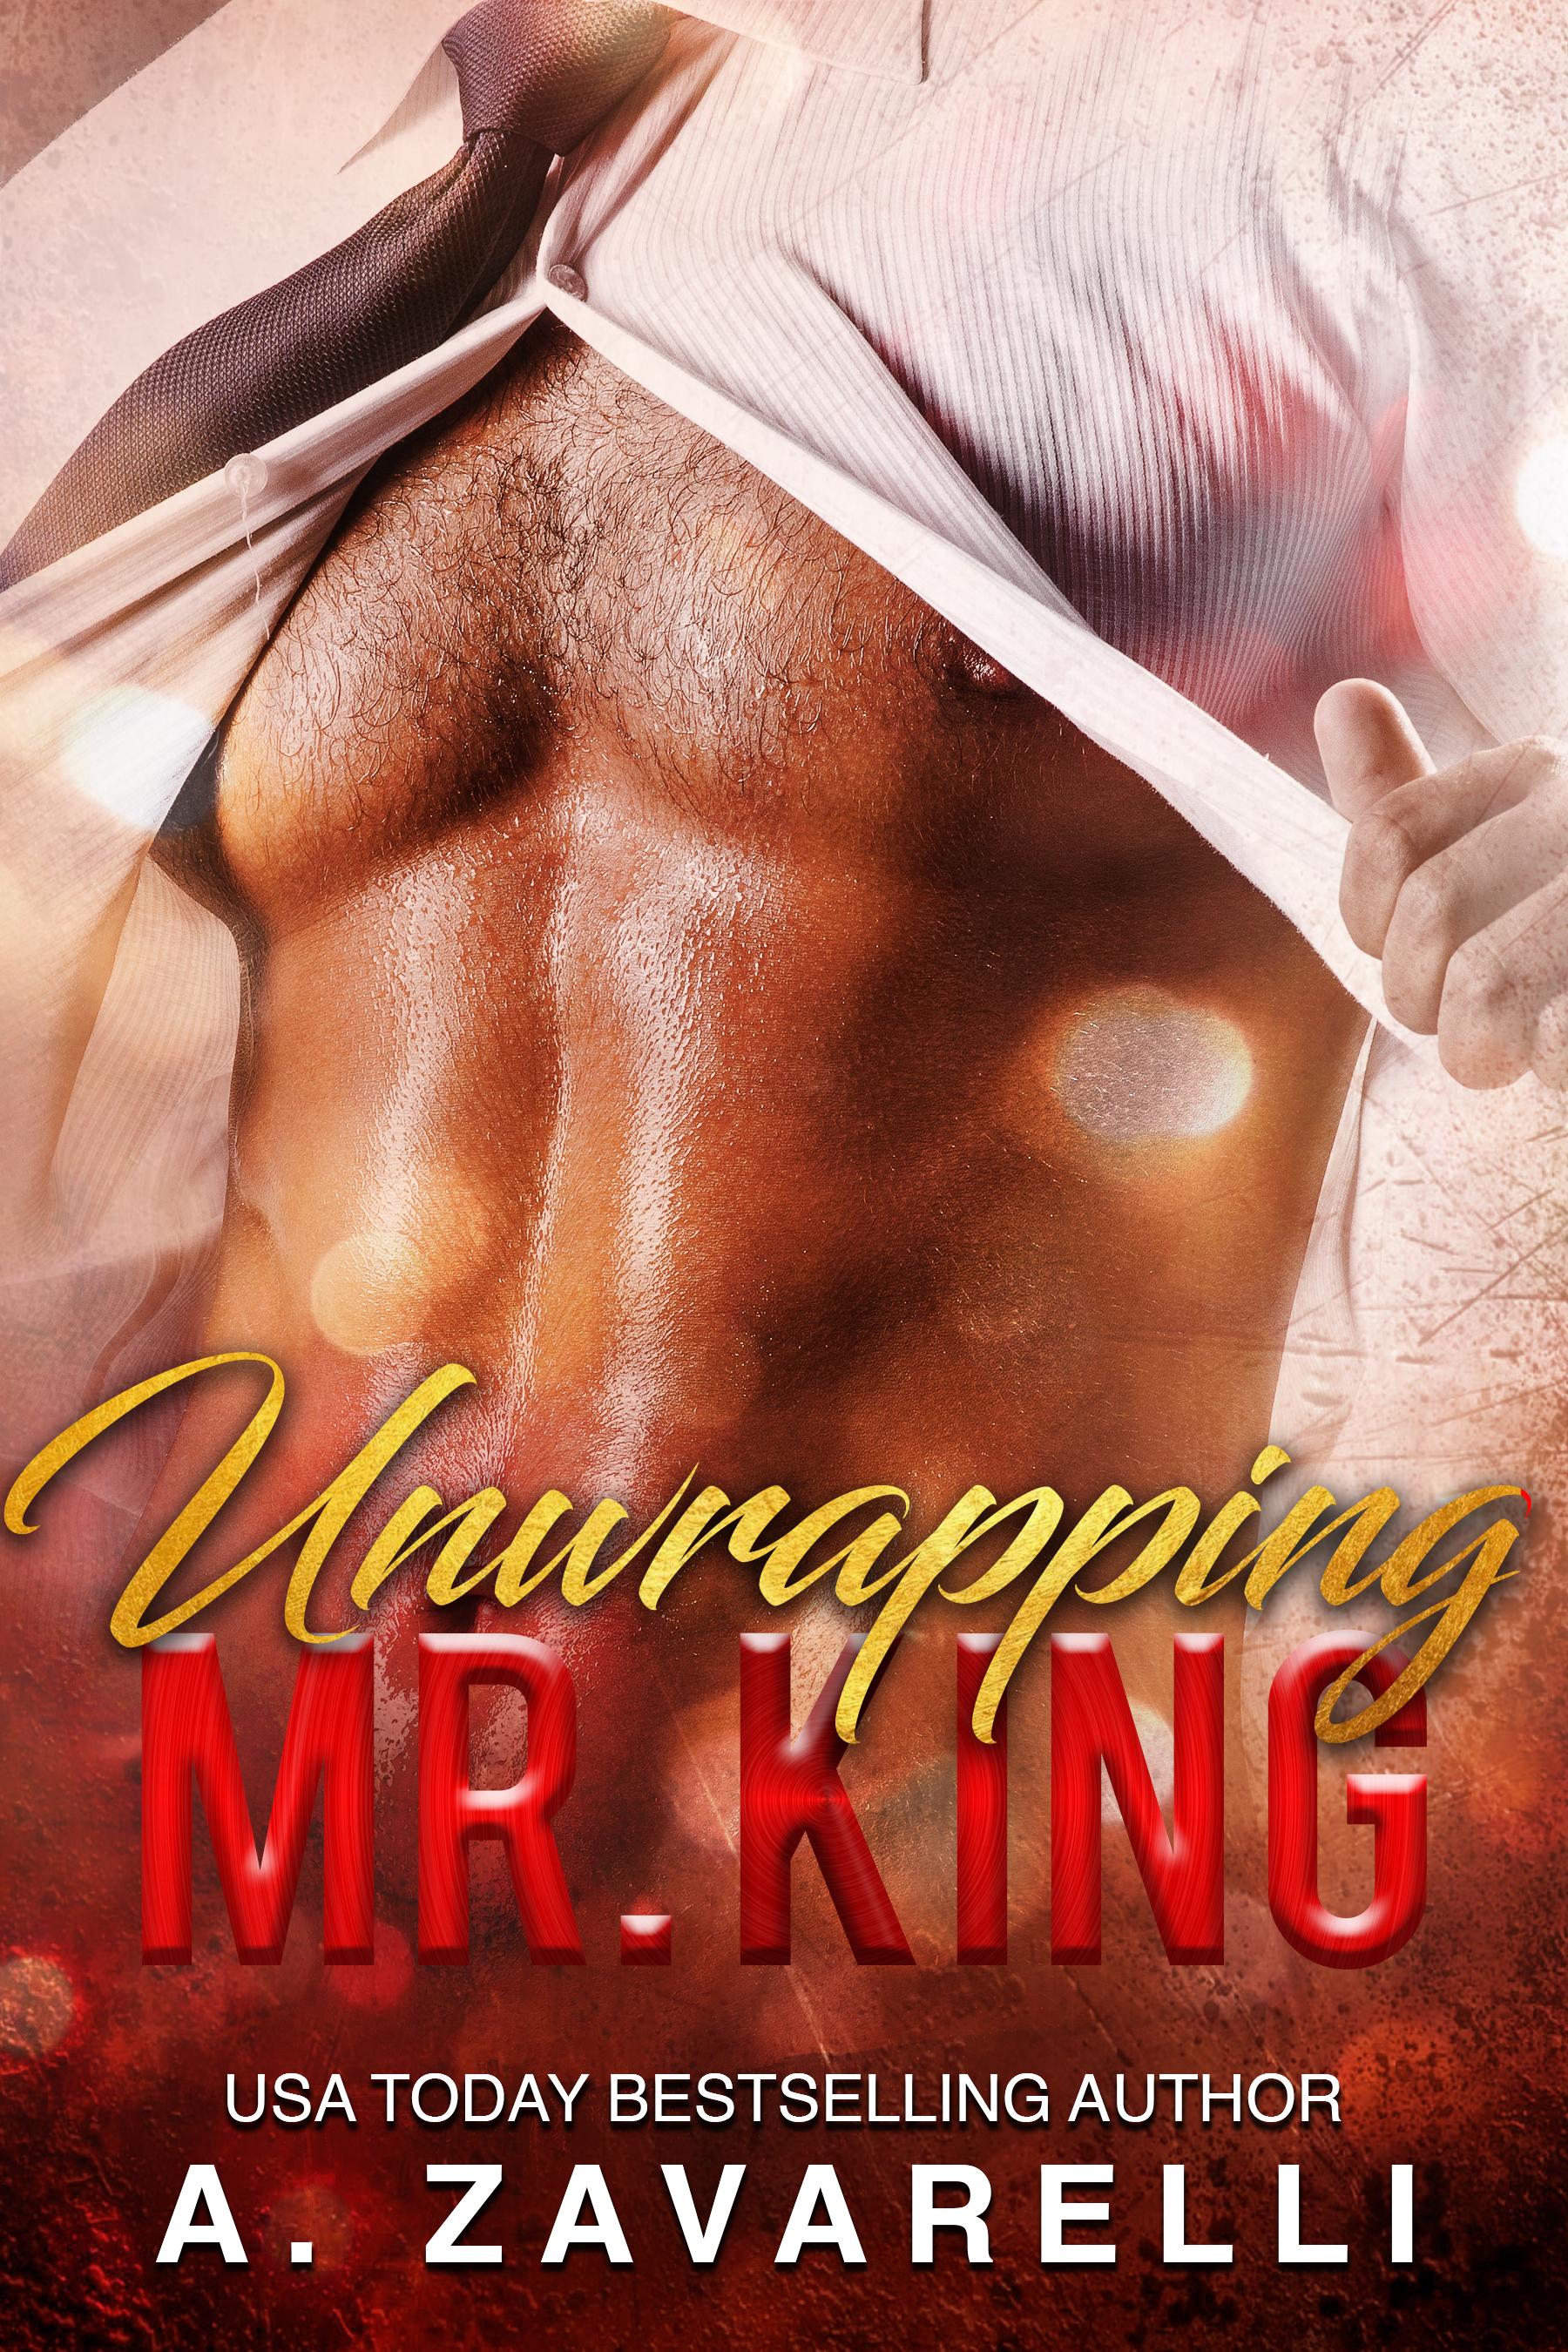 Unwrapping Mr. King